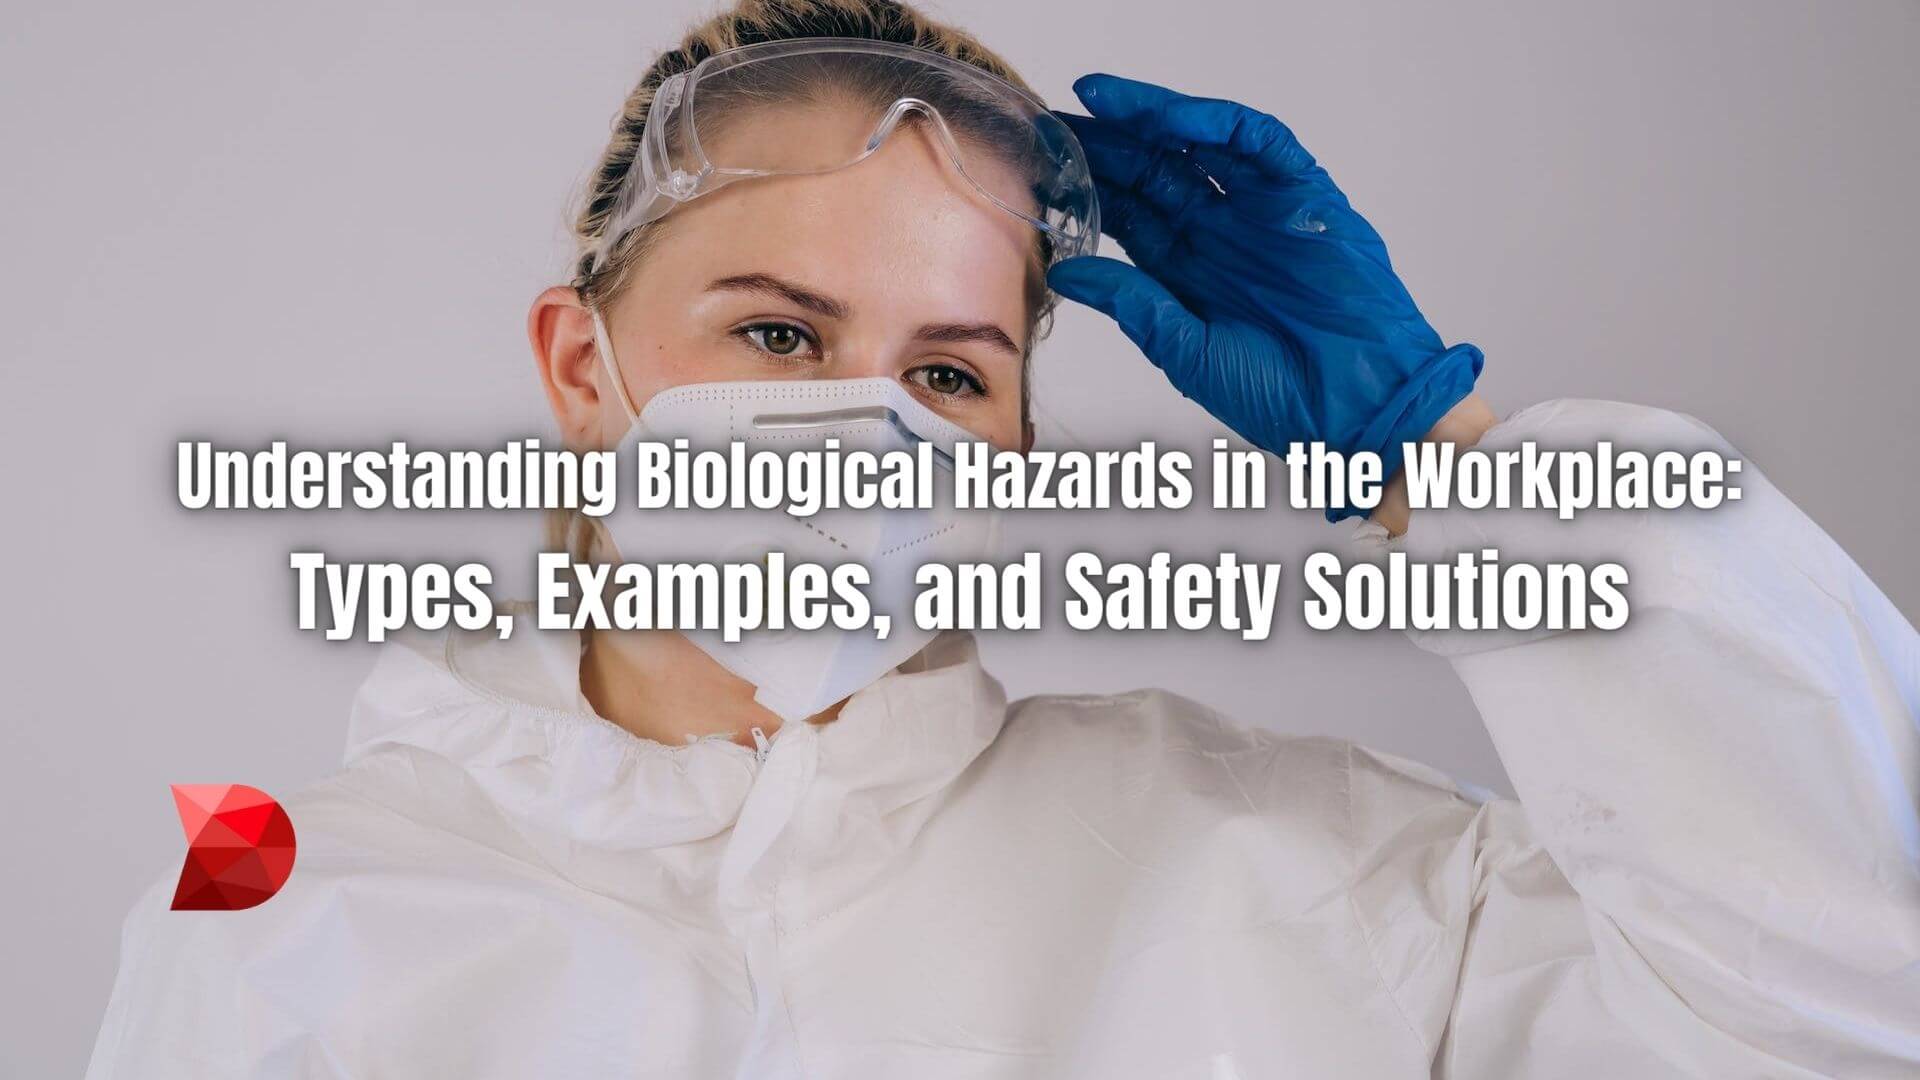 Understanding workplace biological hazards is vital for a secure work environment. Learn more about the types, examples, and solutions here.